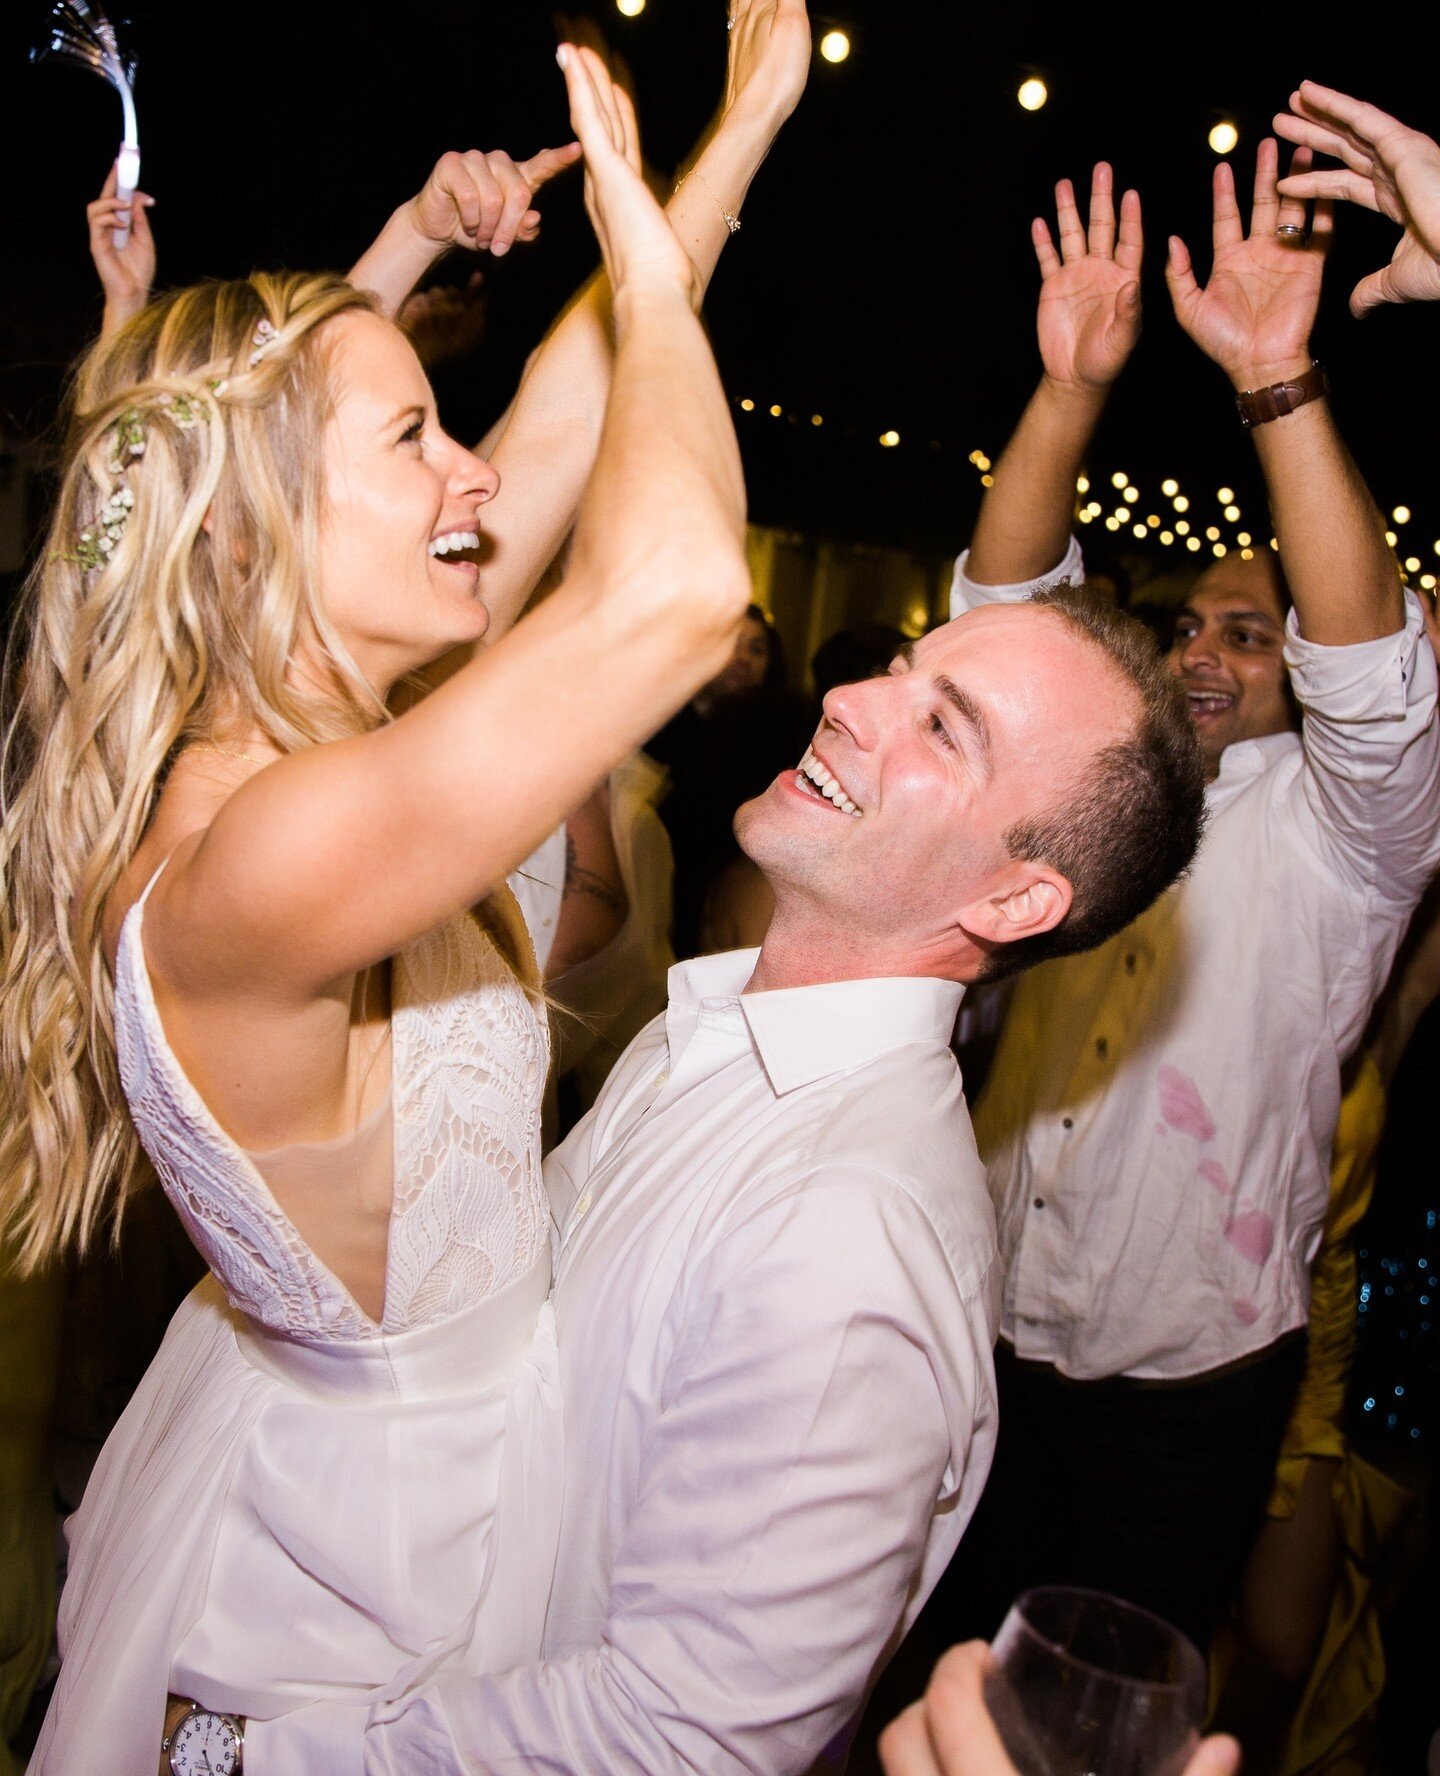 #TuesdayTip: If you want a KILLER dance floor at your wedding, one of the absolute BEST ways to ensure that (besides hiring the best DJs) is to make sure YOU are out on the dancefloor. Where the couple goes, the guests will follow. So if you're groov